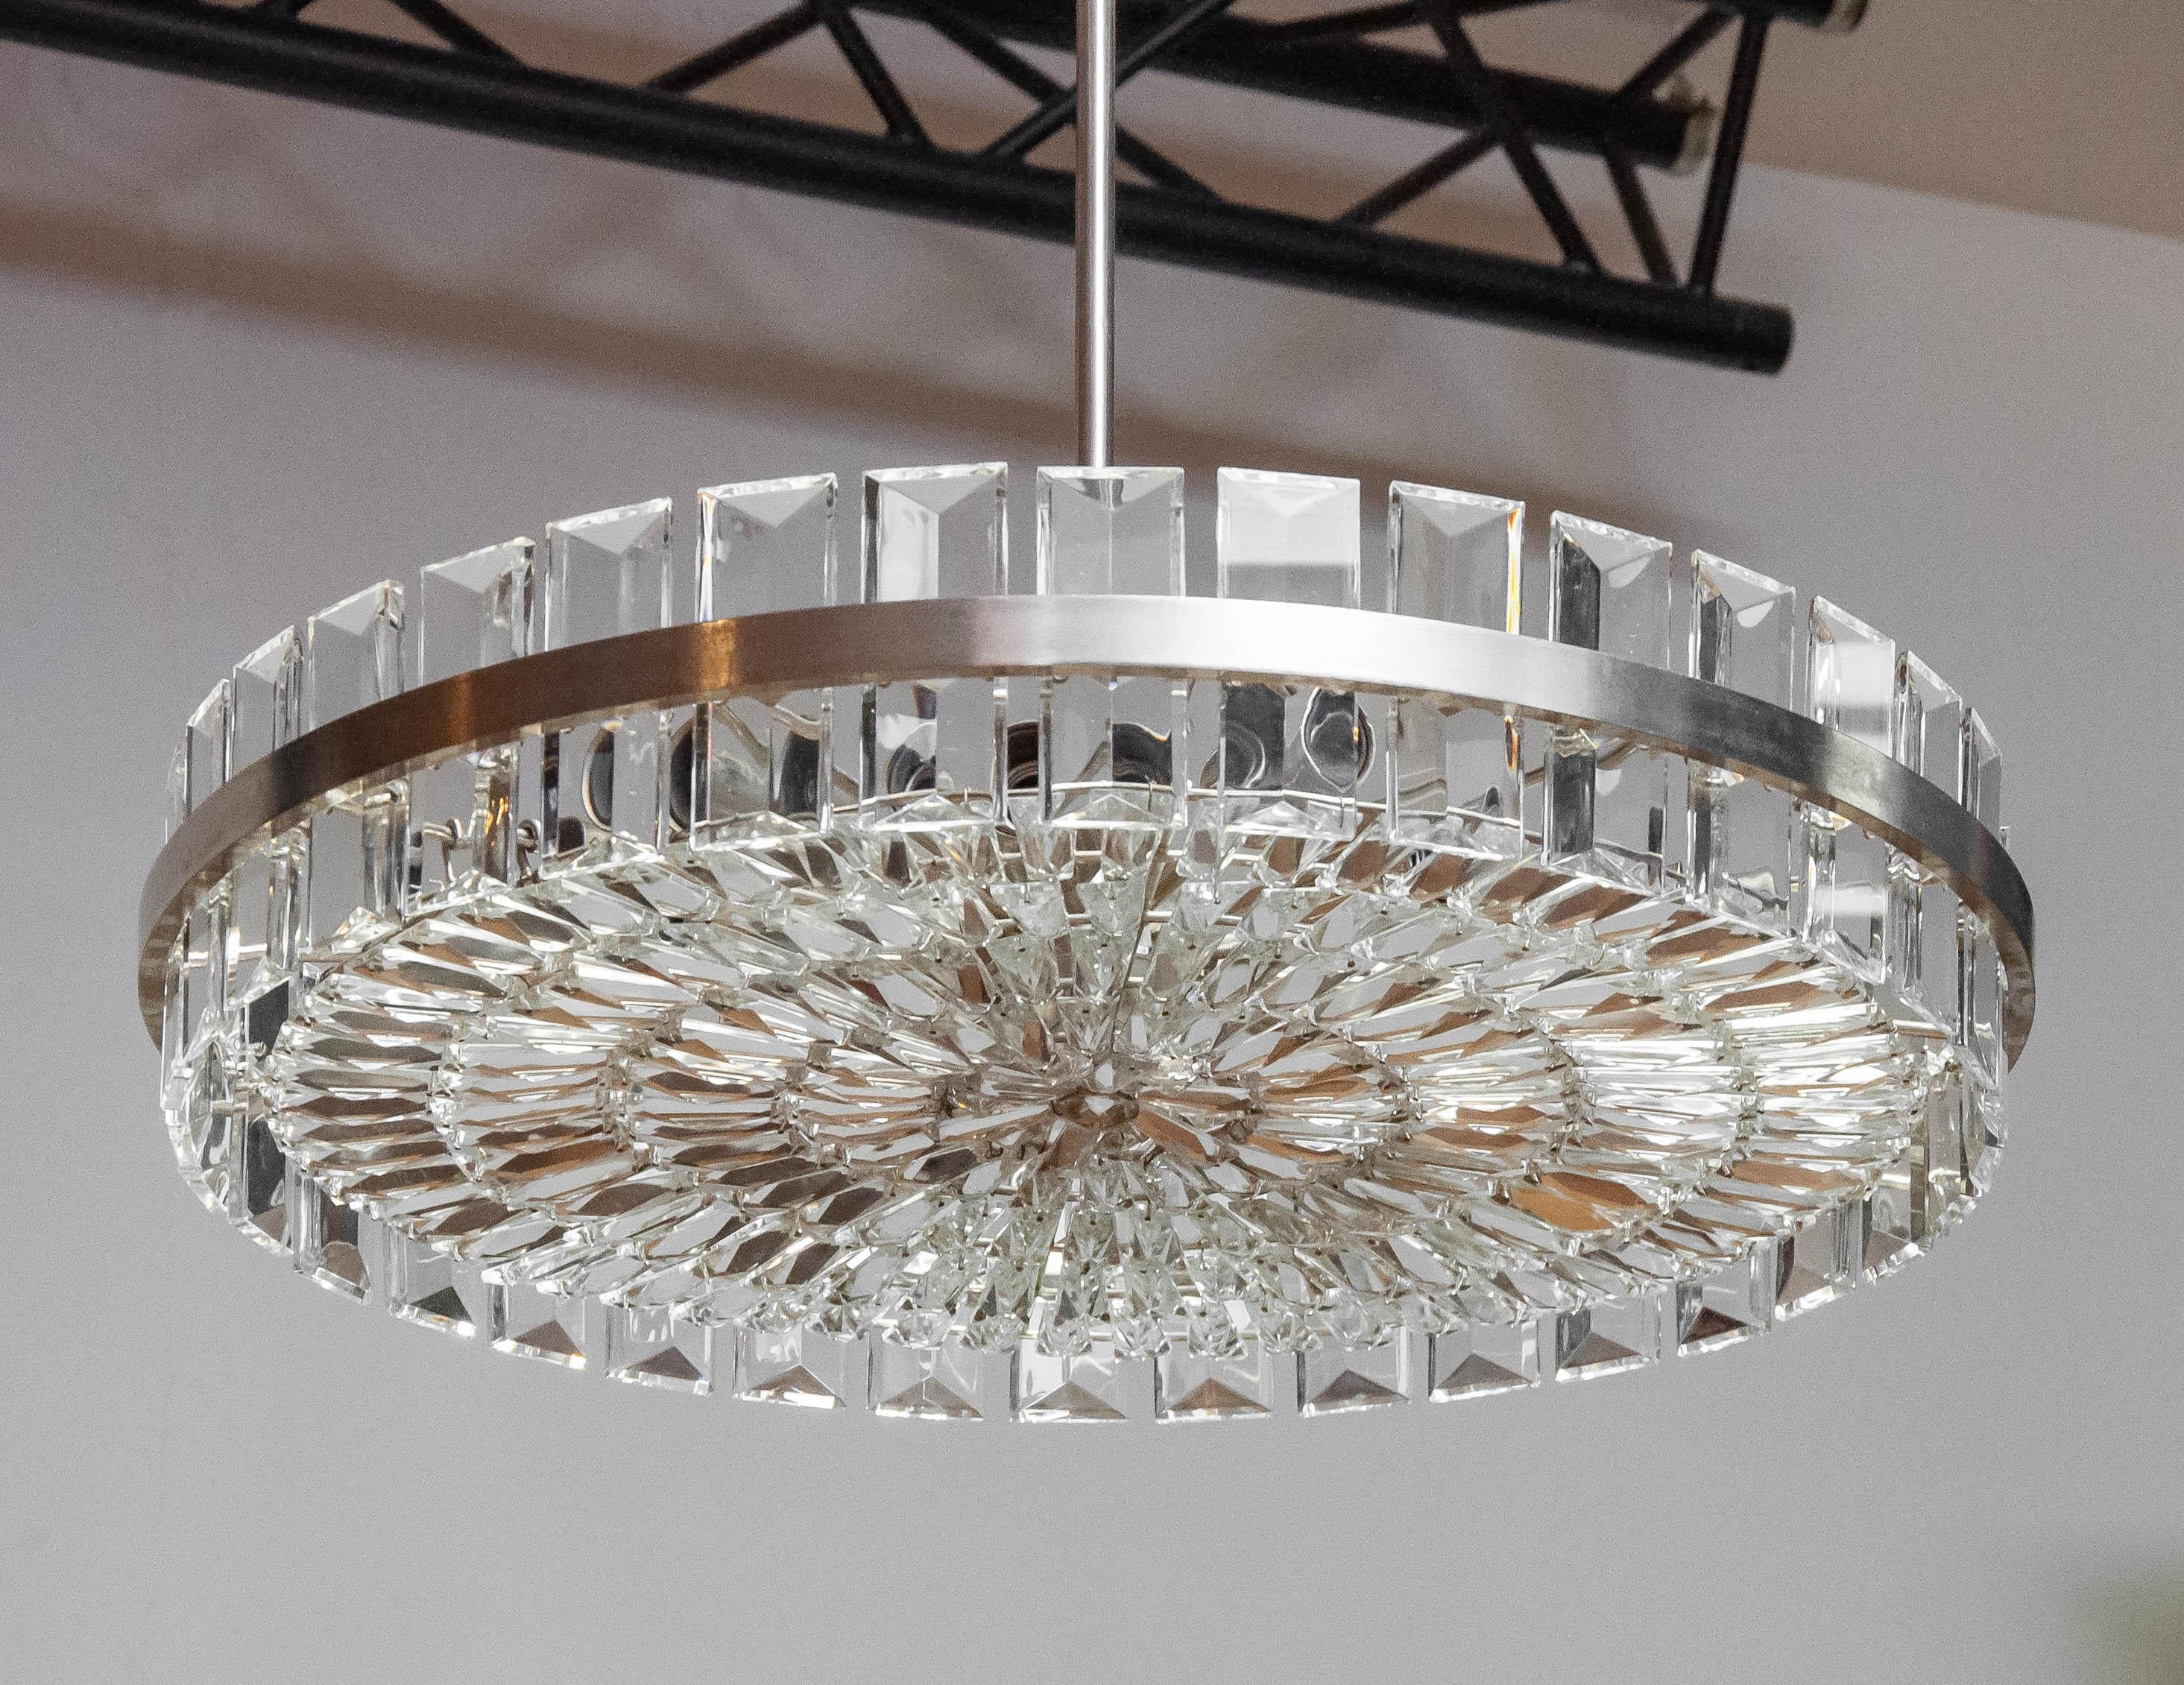 Very exclusive and beautiful large high quality chandelier / flush mount by Bakalowits & Söhne Austria from the 1960s. It is made of hand-cut crystals and a nickel-plated (chrome) frame. 
The chandelier contains twelve E27/28 screw fittings.
The